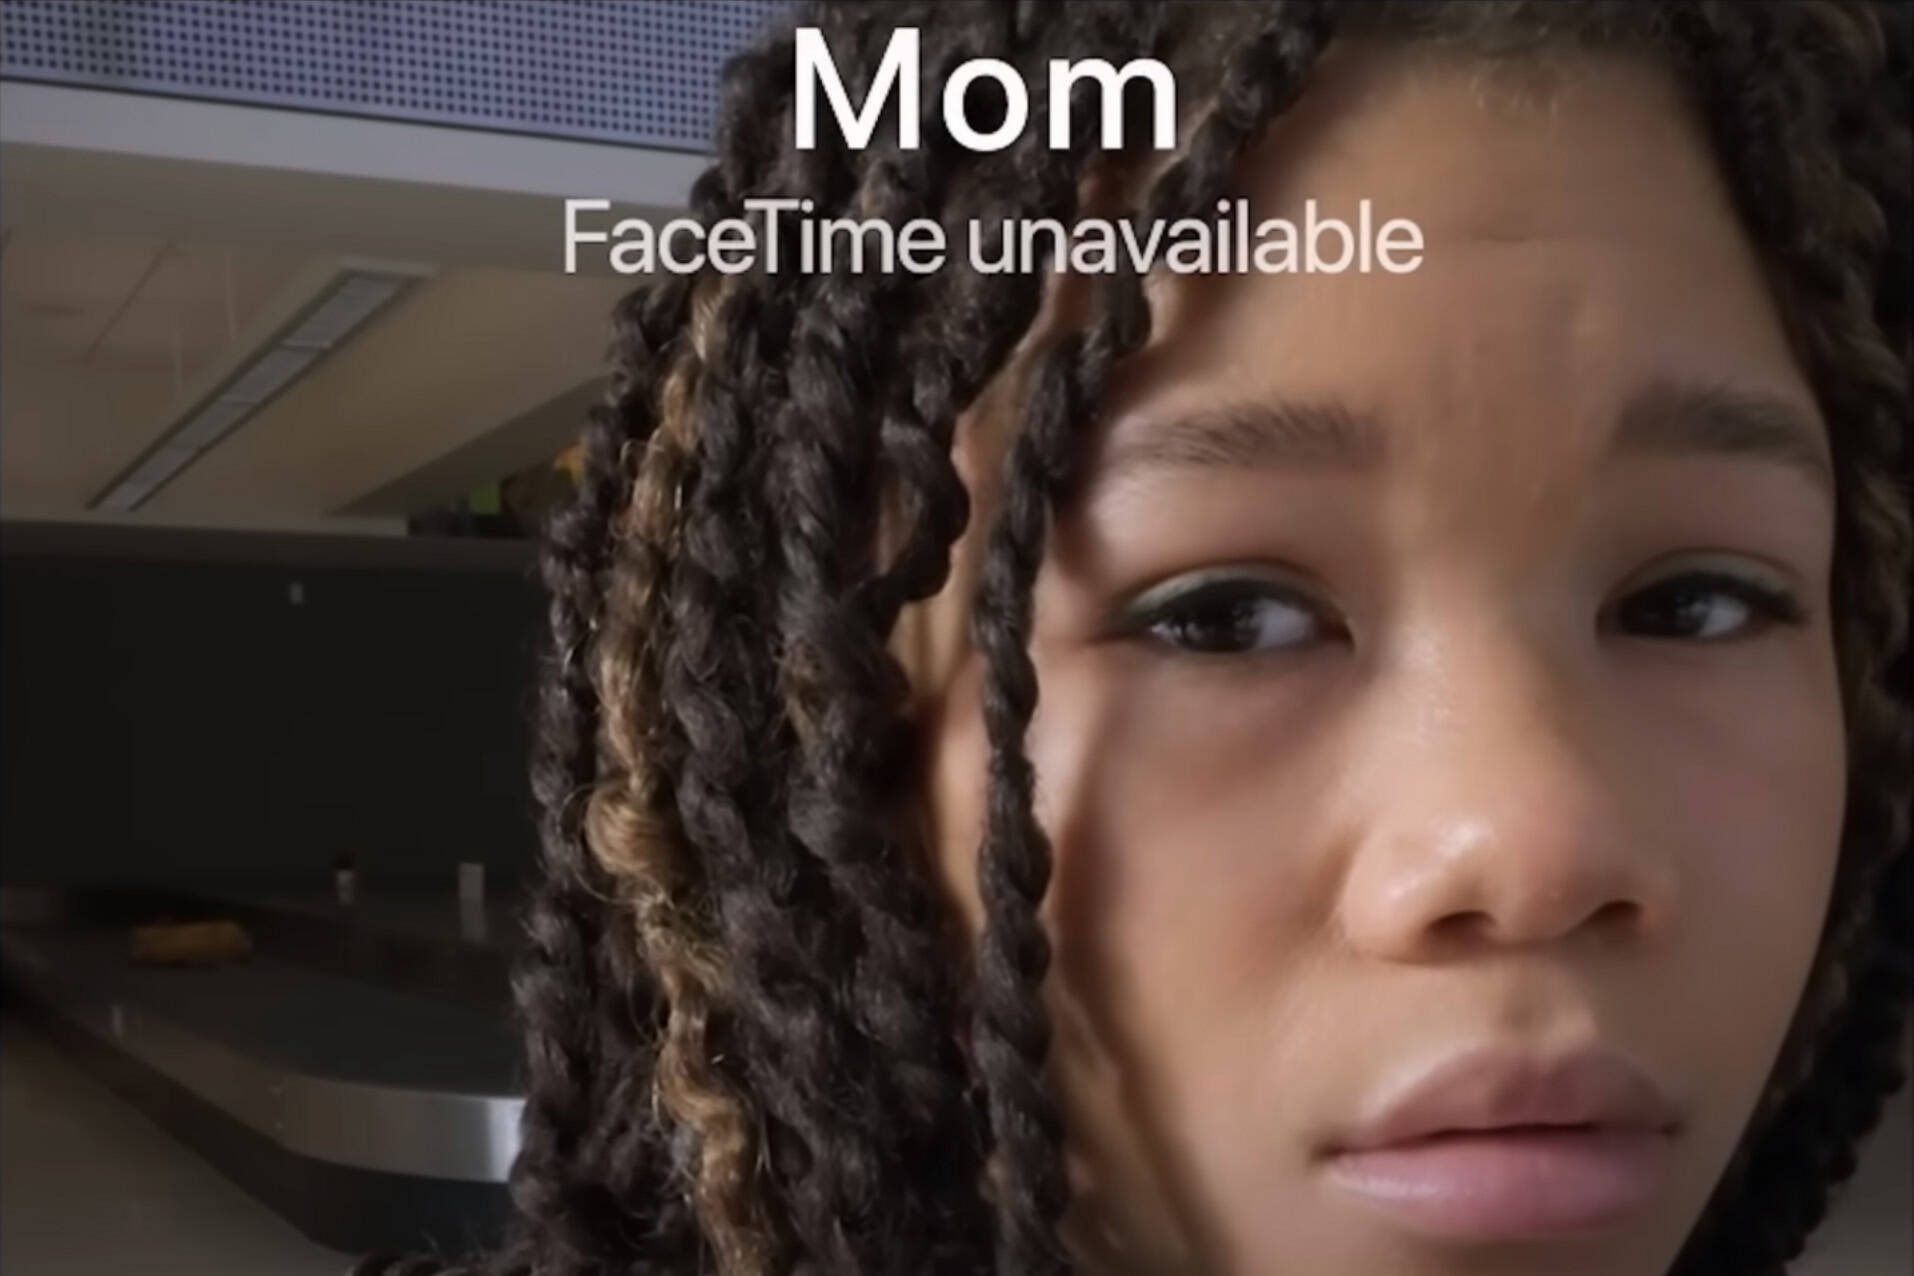 Storm Reid plays June Allen in “Missing,” a screenlife film that takes place entirely on the screens of multiple devices, including a laptop and an iPhone. (Photo courtesy Sony Pictures)